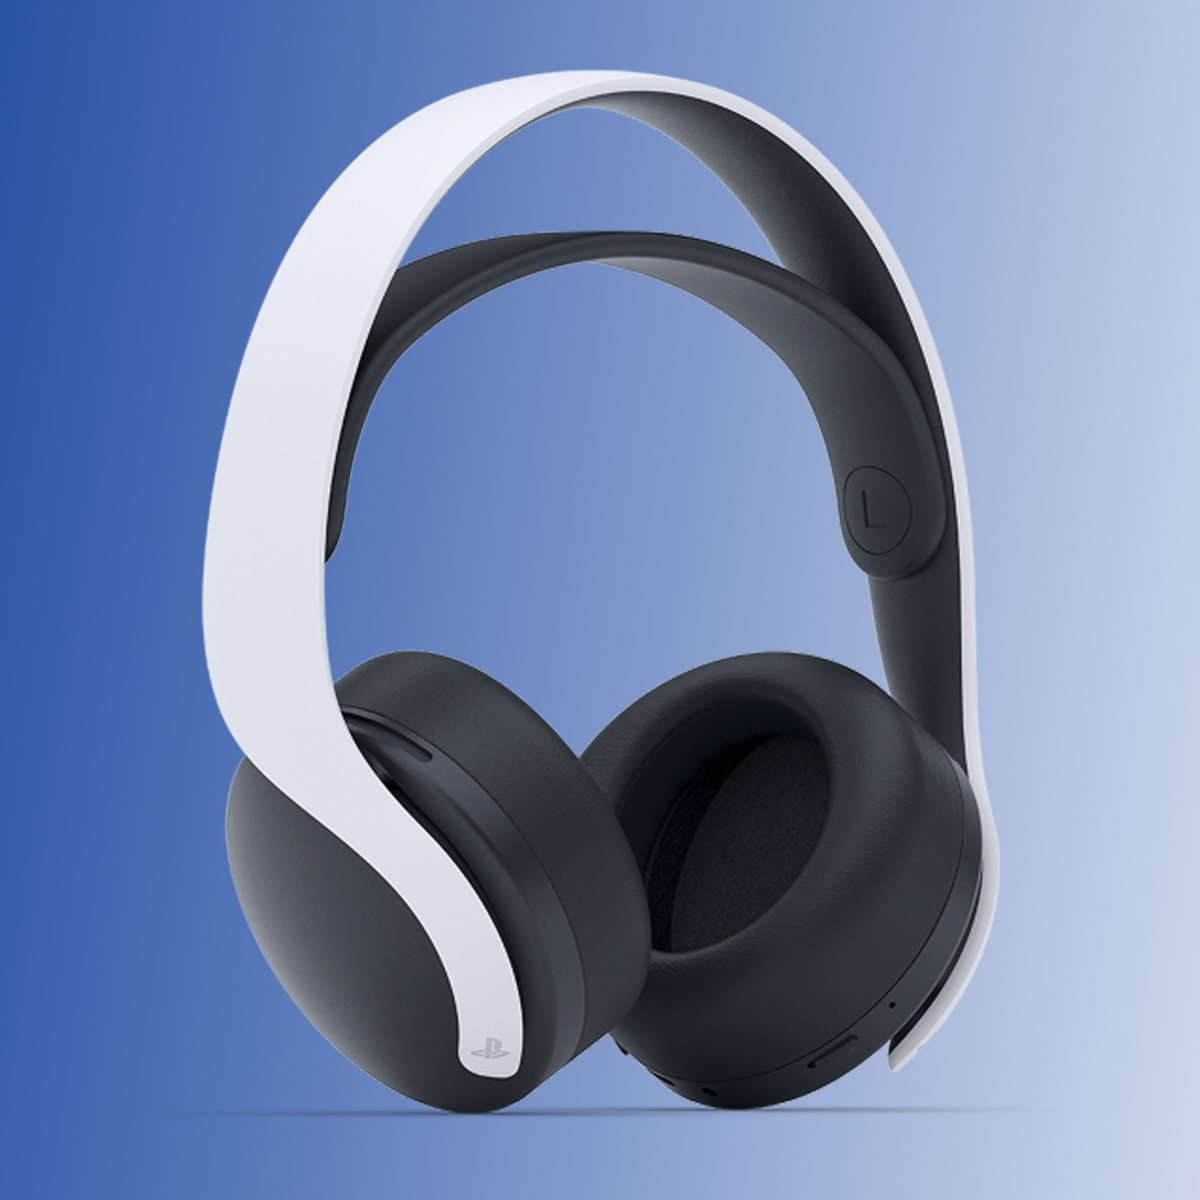 Grab yourself the official Sony Pulse 3D PS5 headset at its lowest price  ever on